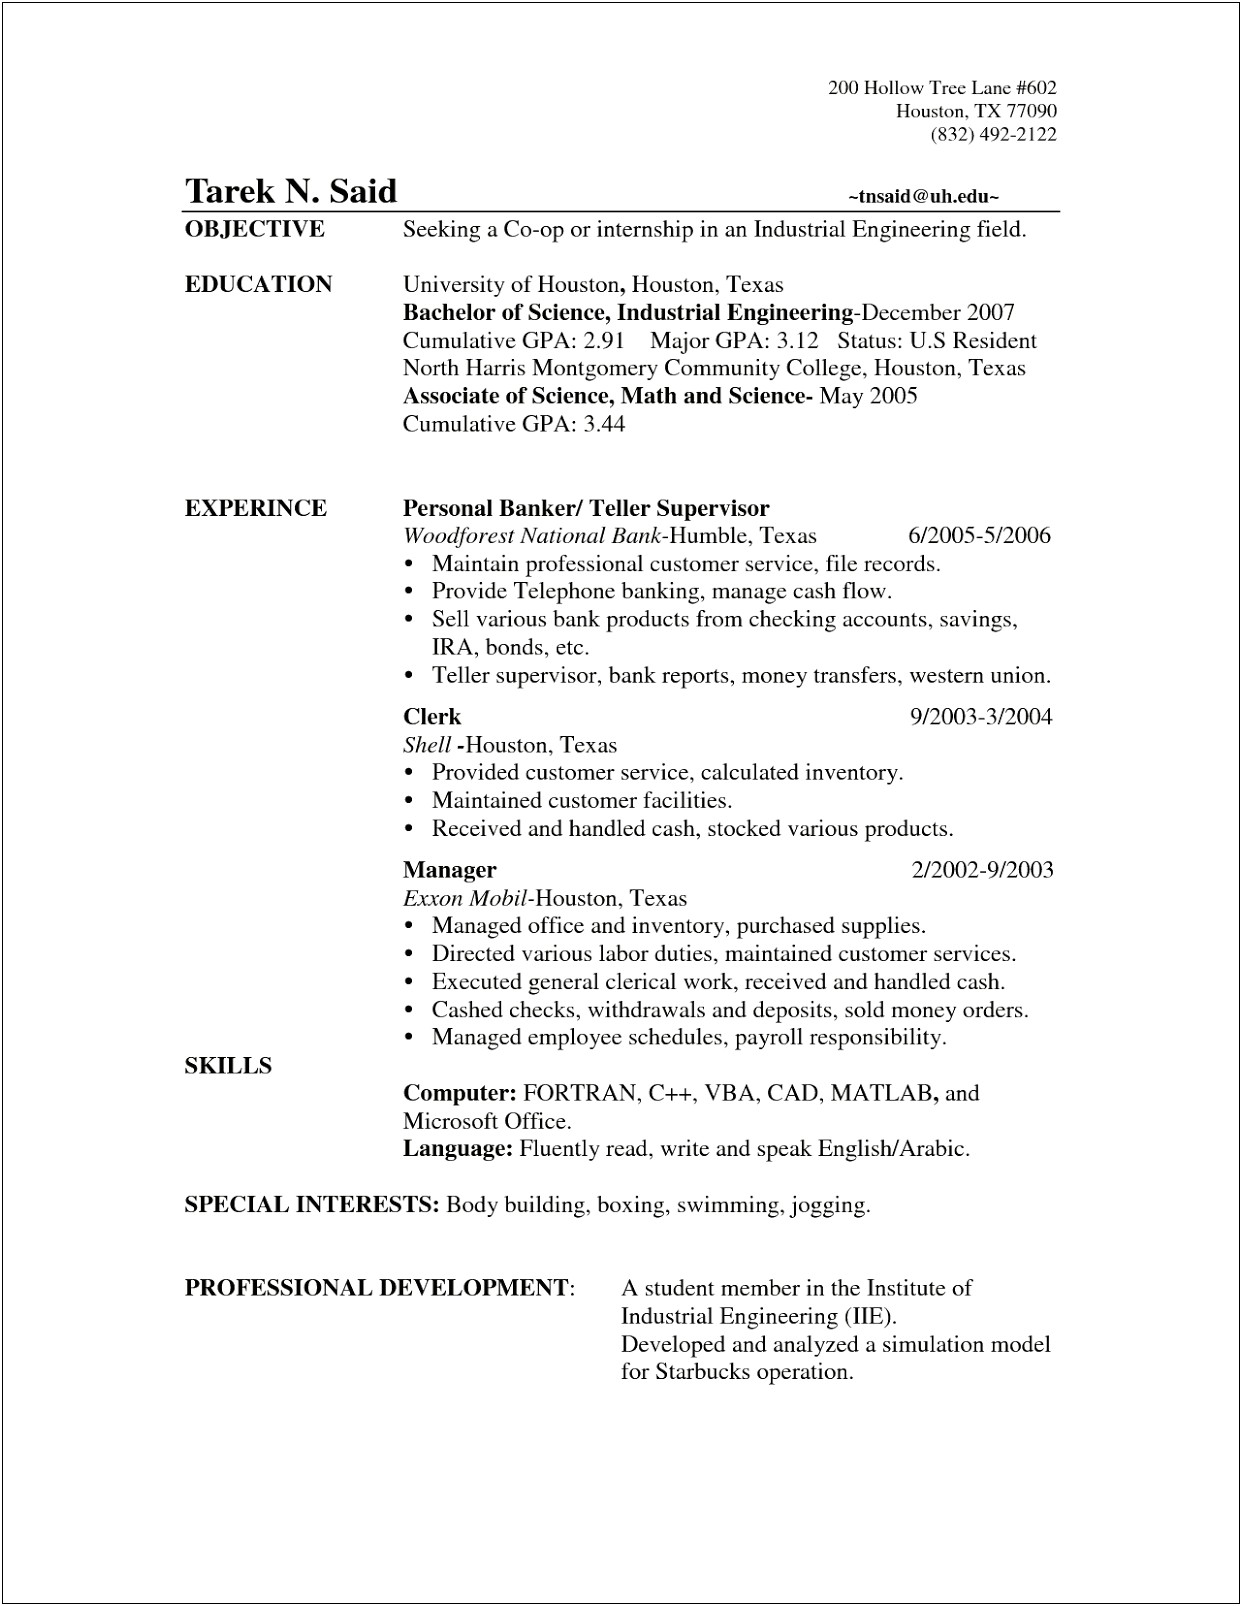 Examples Of Resume For Bank Teller